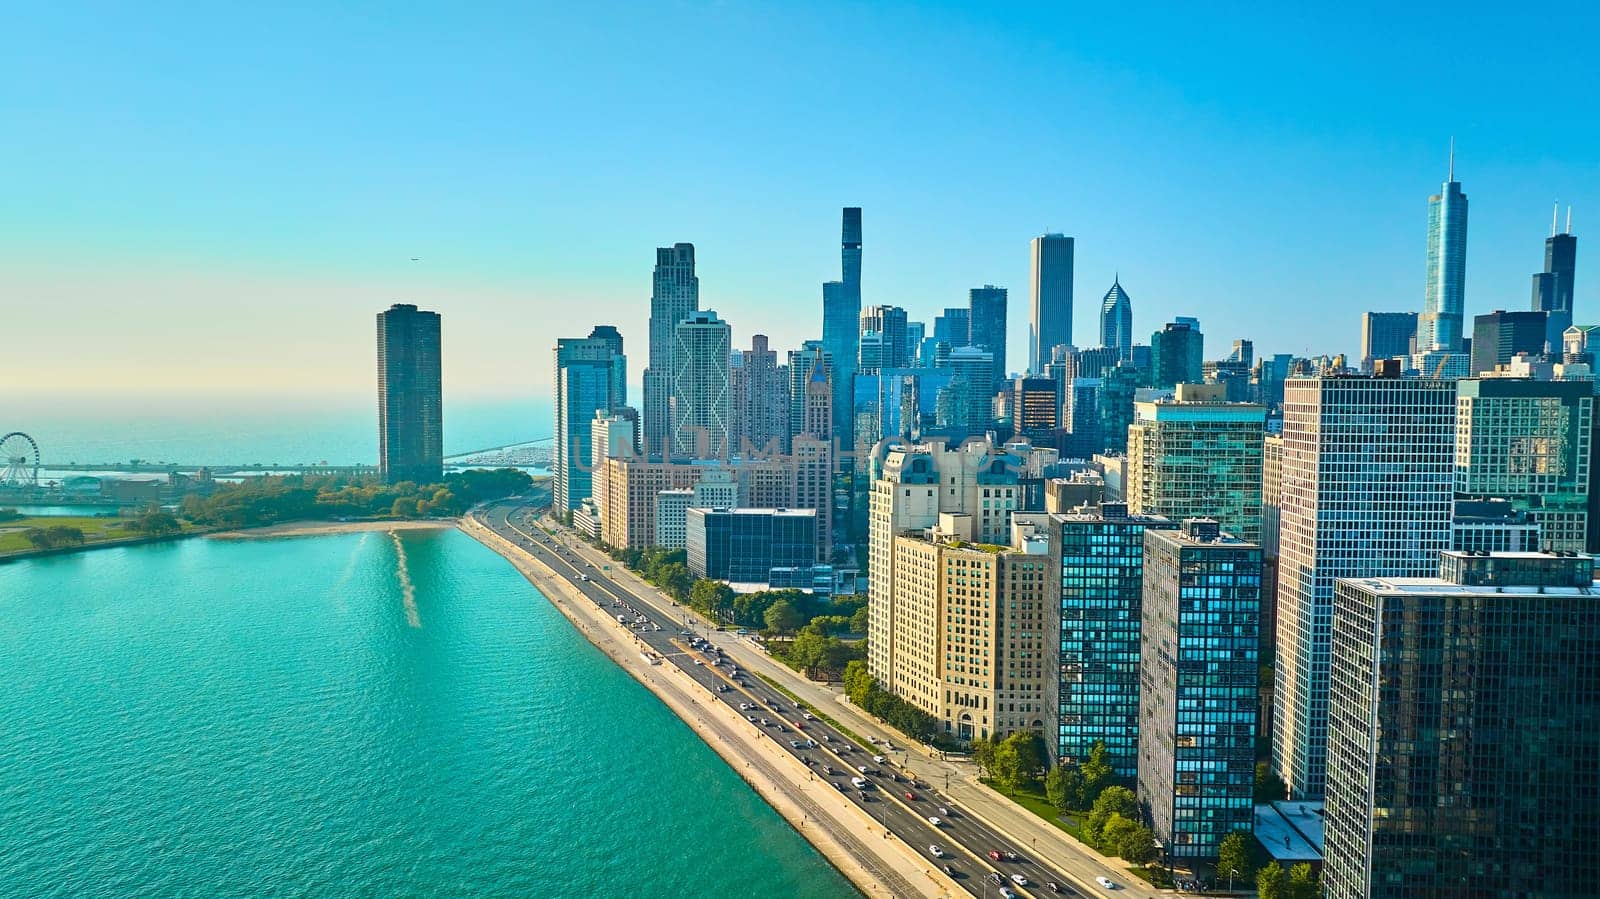 Image of Chicago, IL aerial city skyscraper buildings with clear blue summer sky, tourism, beautiful lake